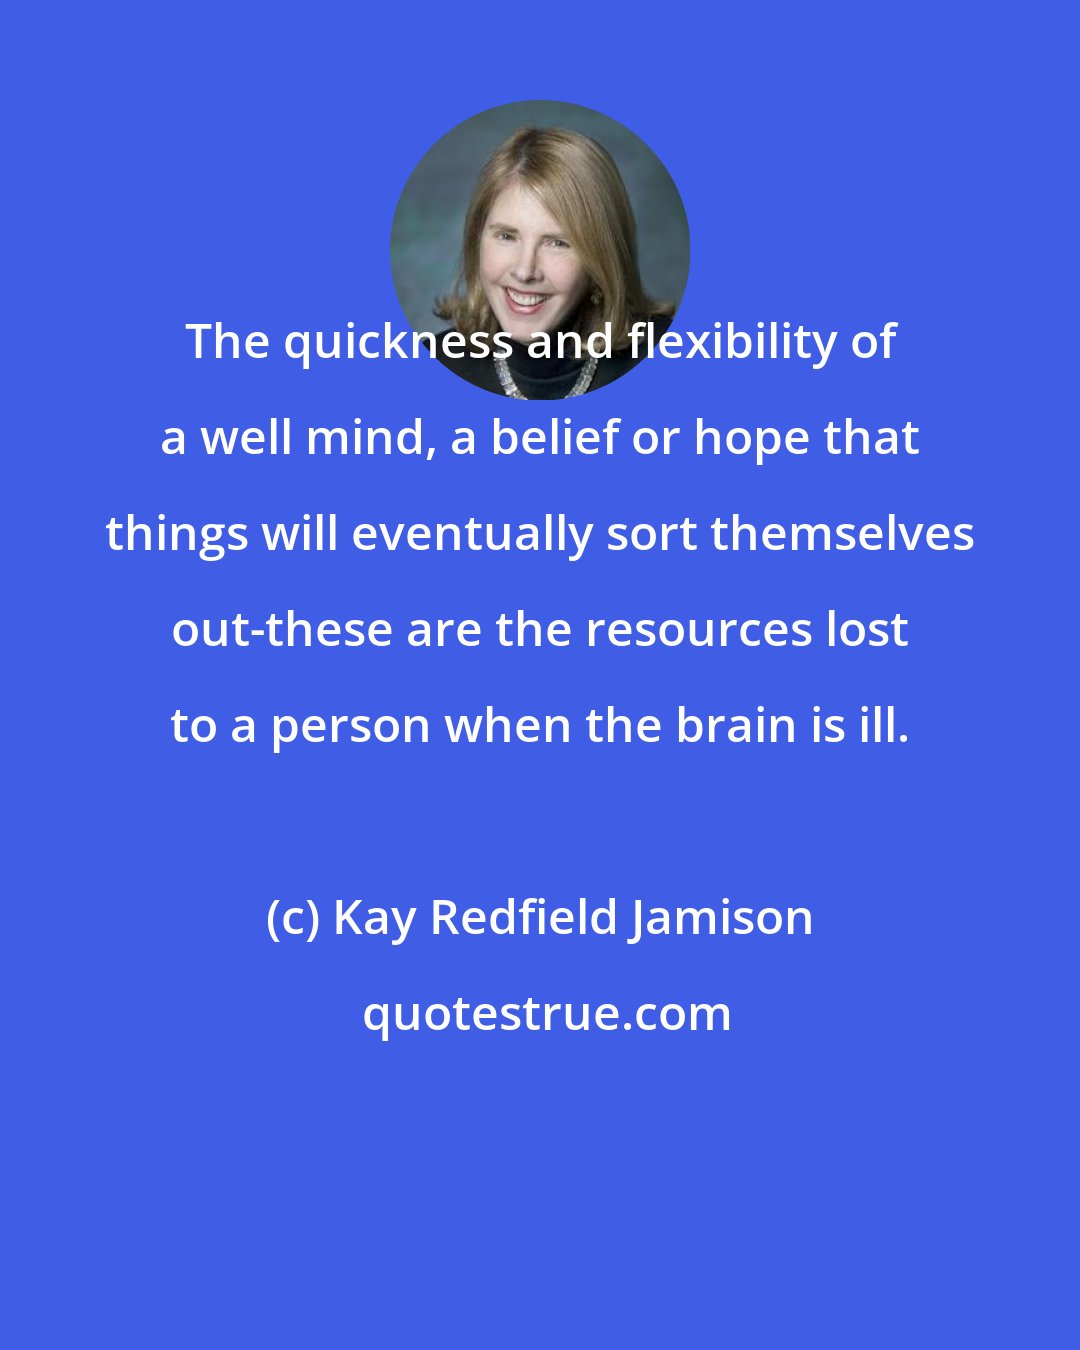 Kay Redfield Jamison: The quickness and flexibility of a well mind, a belief or hope that things will eventually sort themselves out-these are the resources lost to a person when the brain is ill.